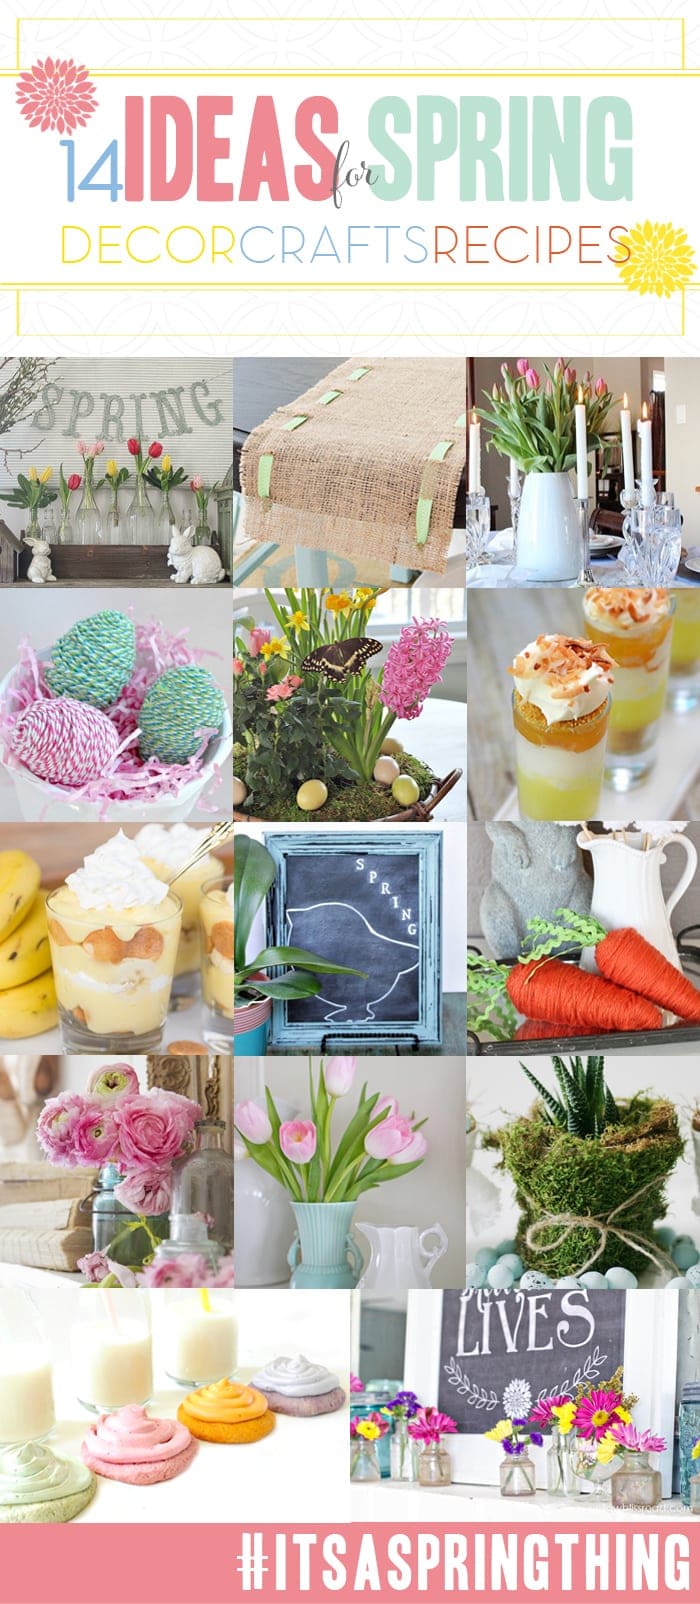 14 Ideas for Spring | It's a Spring Thing